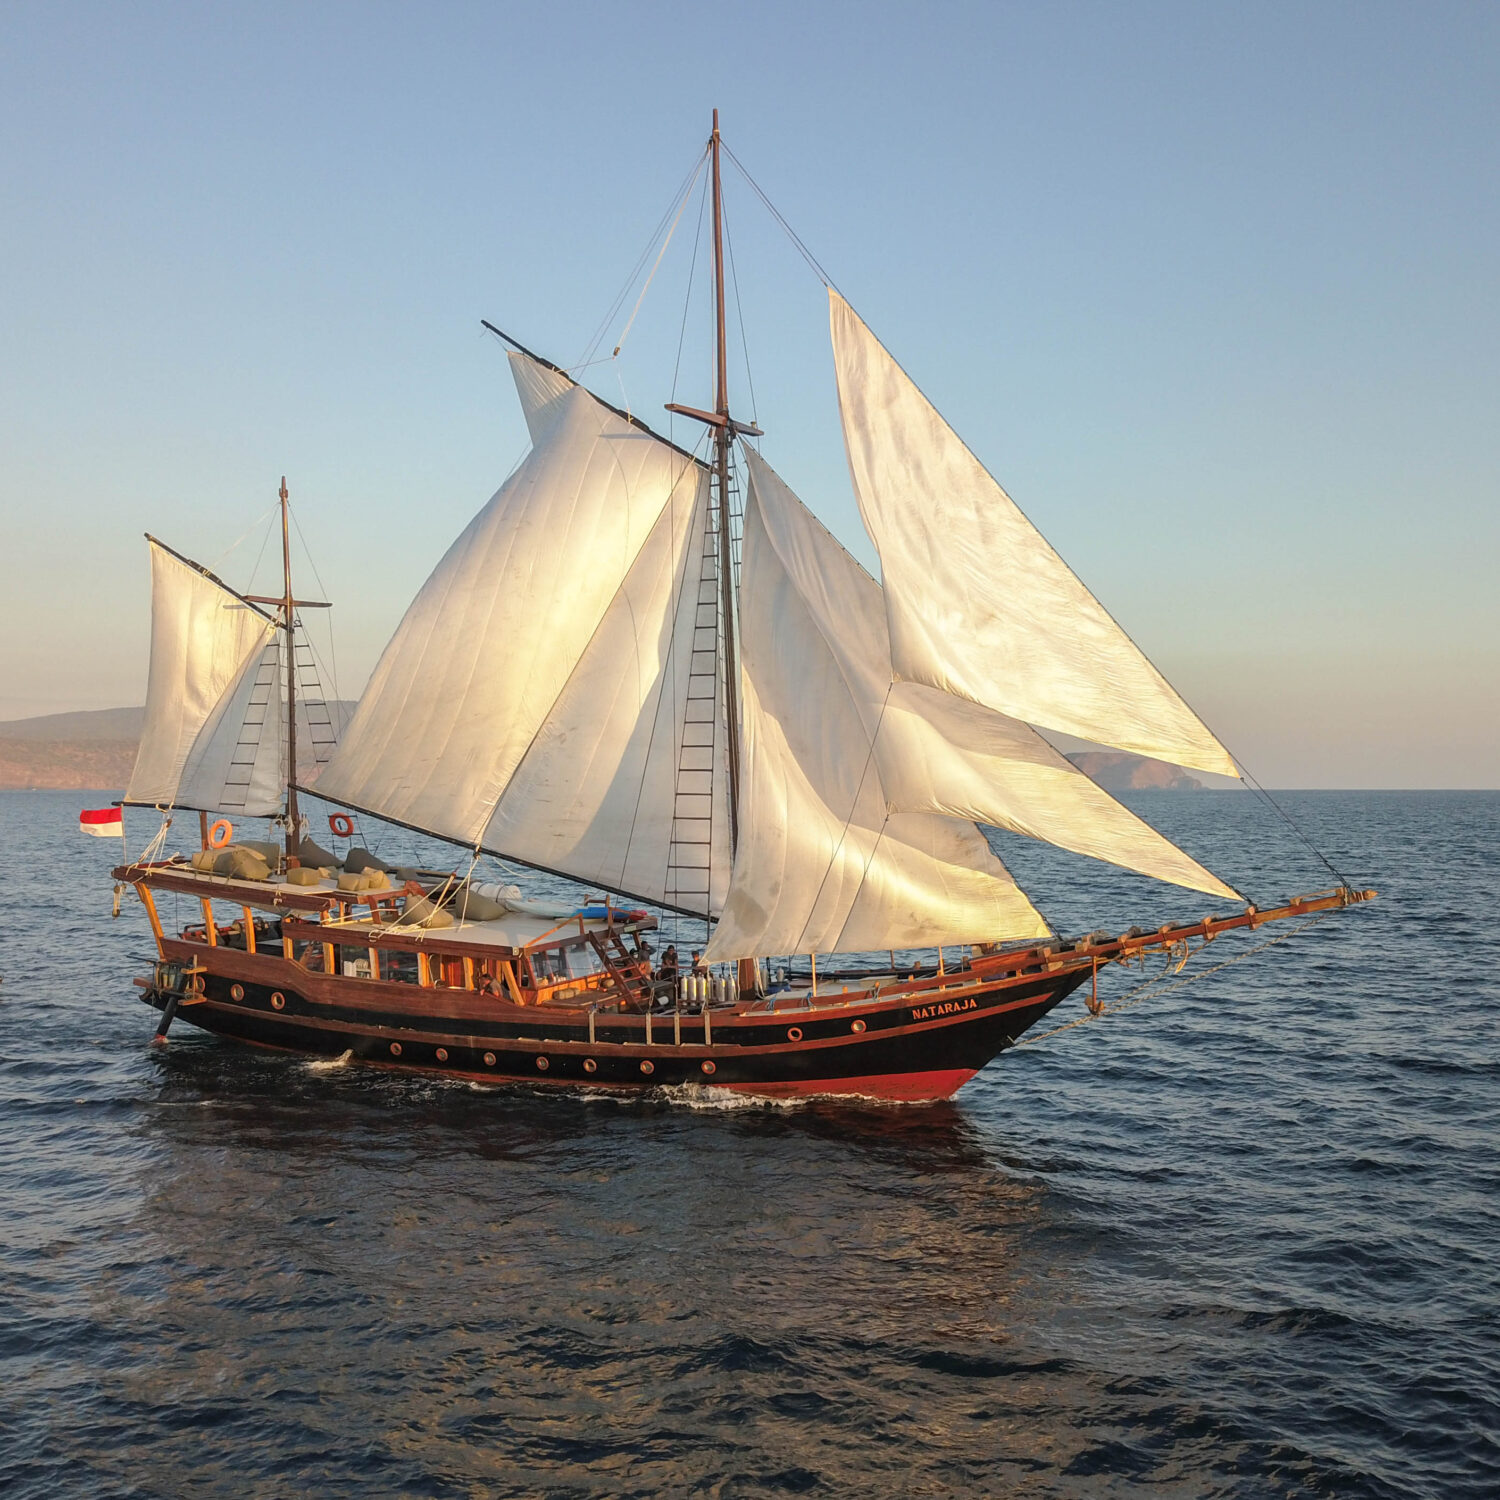 private yacht phinisi traditionnalwoodenboat woodensailingboat indonesia crusingindonesia Croisières en Indonésie